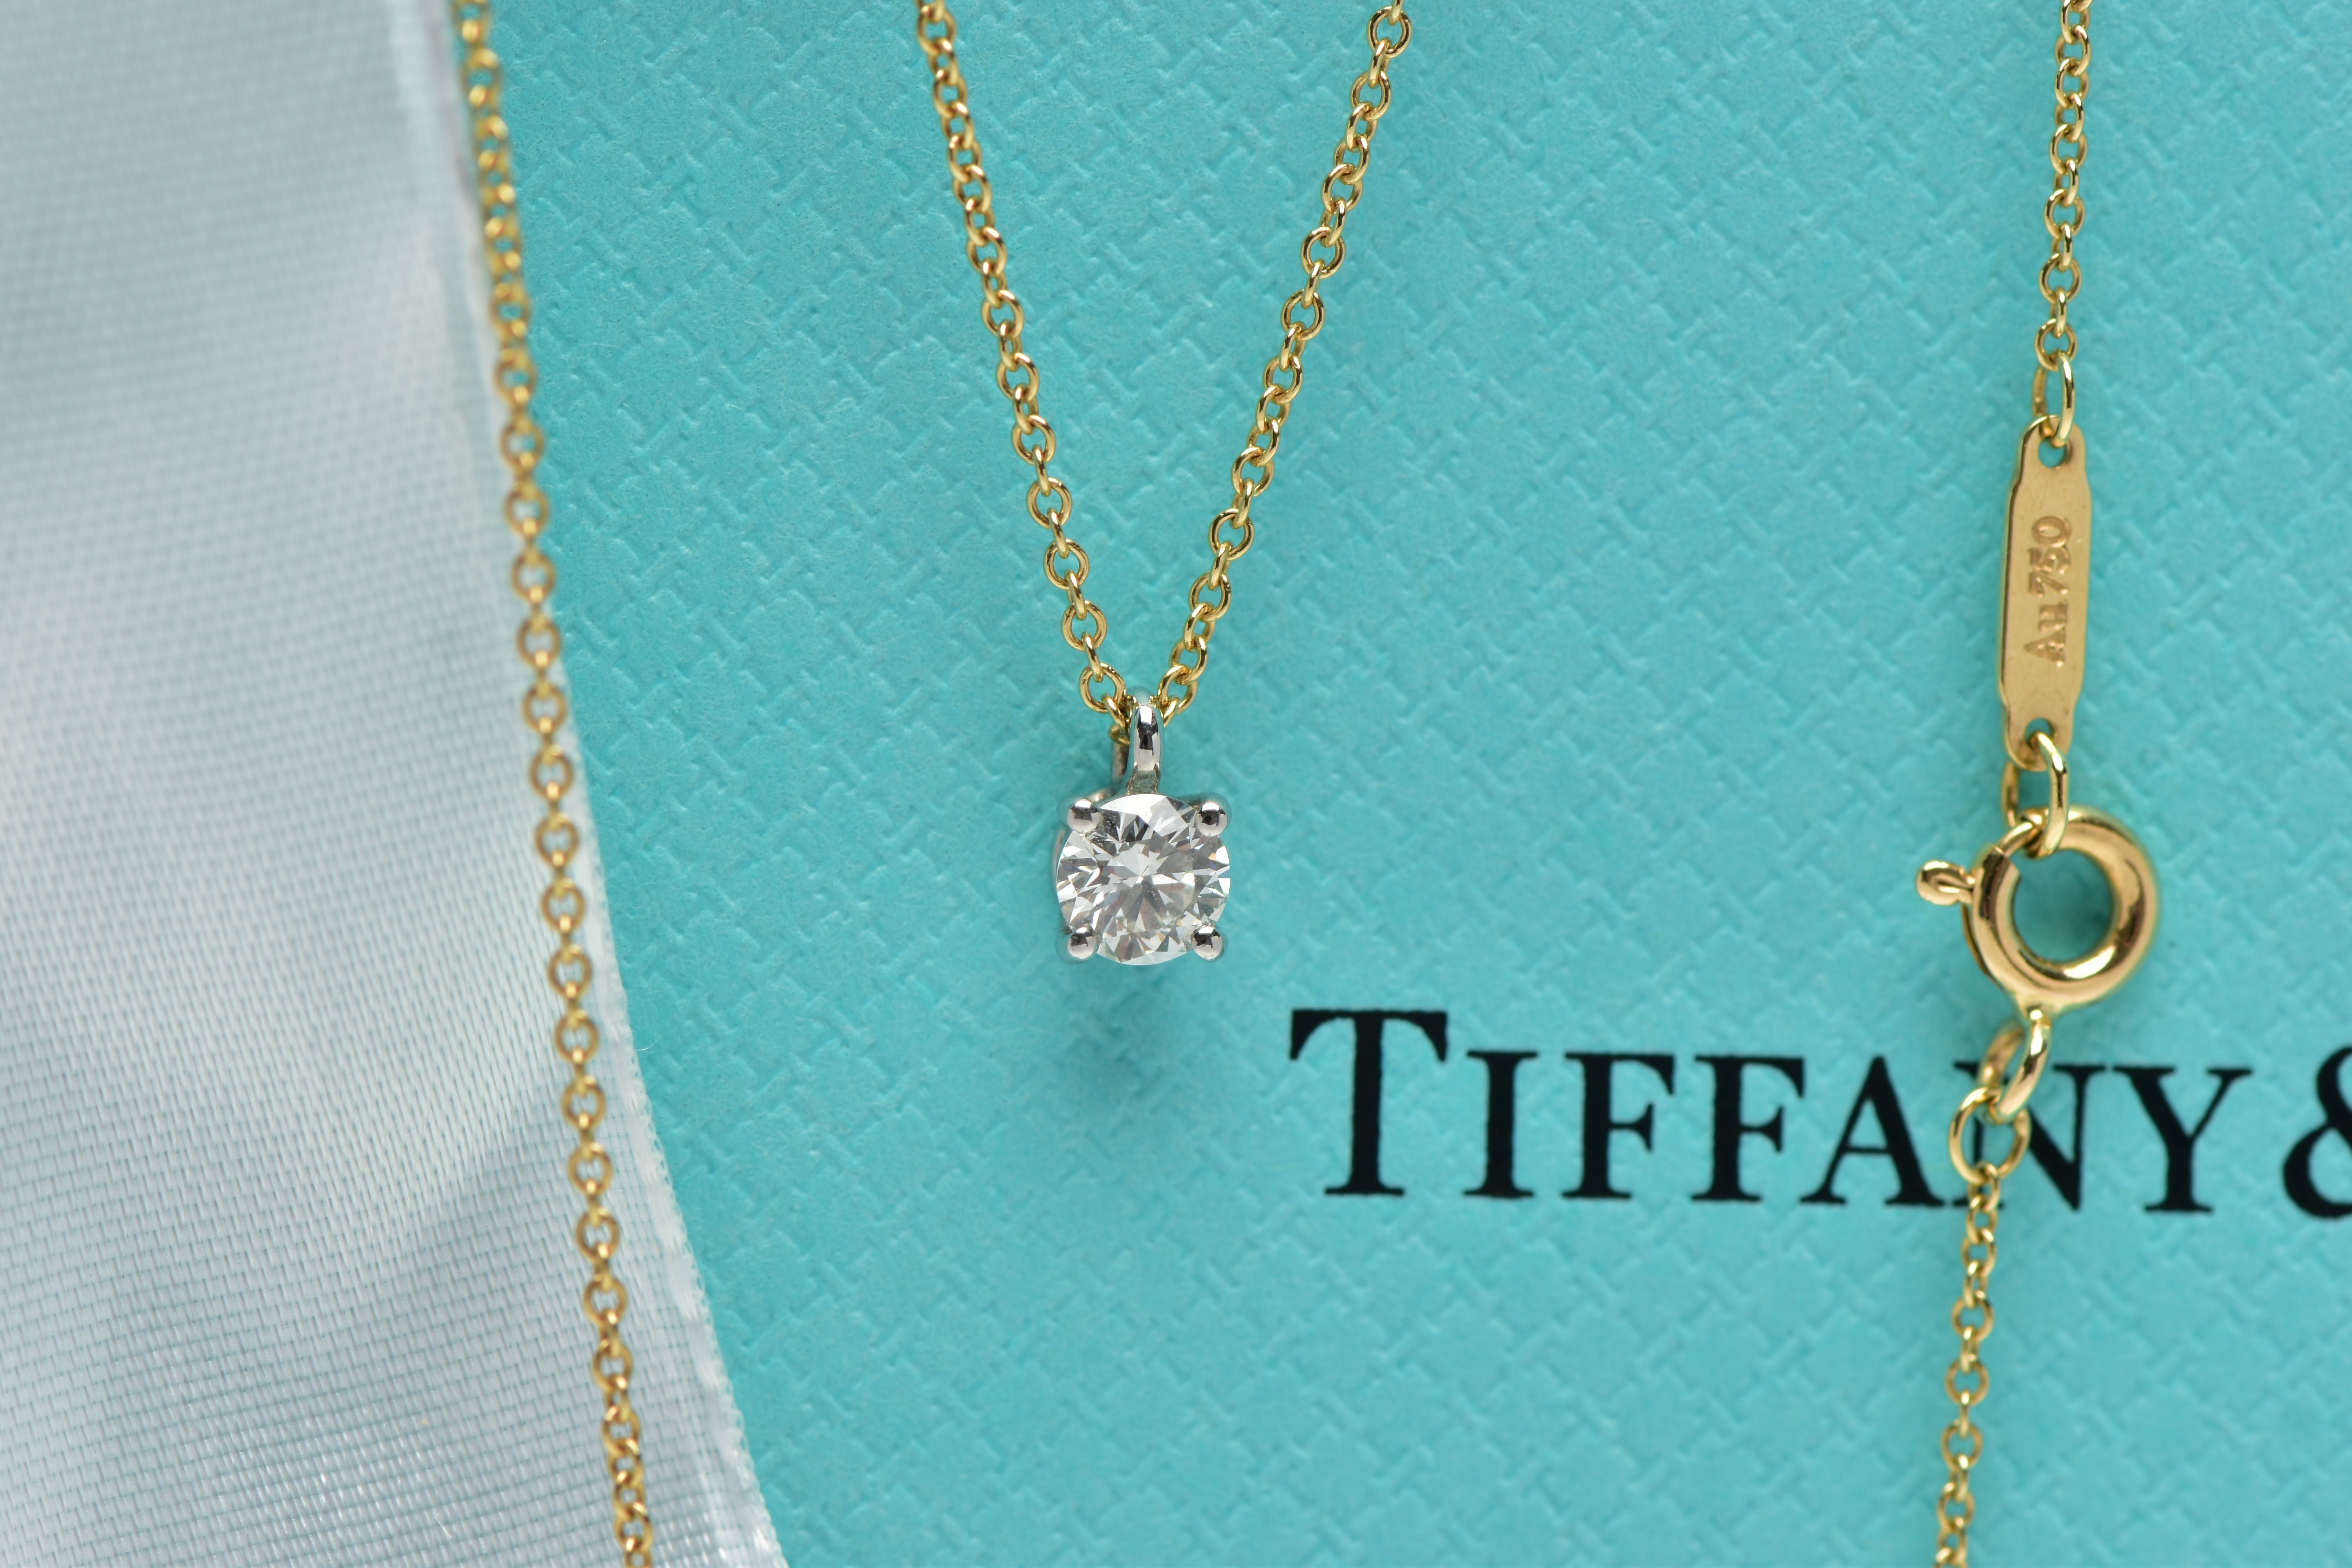 AN 18CT YELLOW AND WHITE GOLD TIFFANY & CO DIAMOND PENDANT NECKLACE, set with a round brilliant - Image 3 of 6